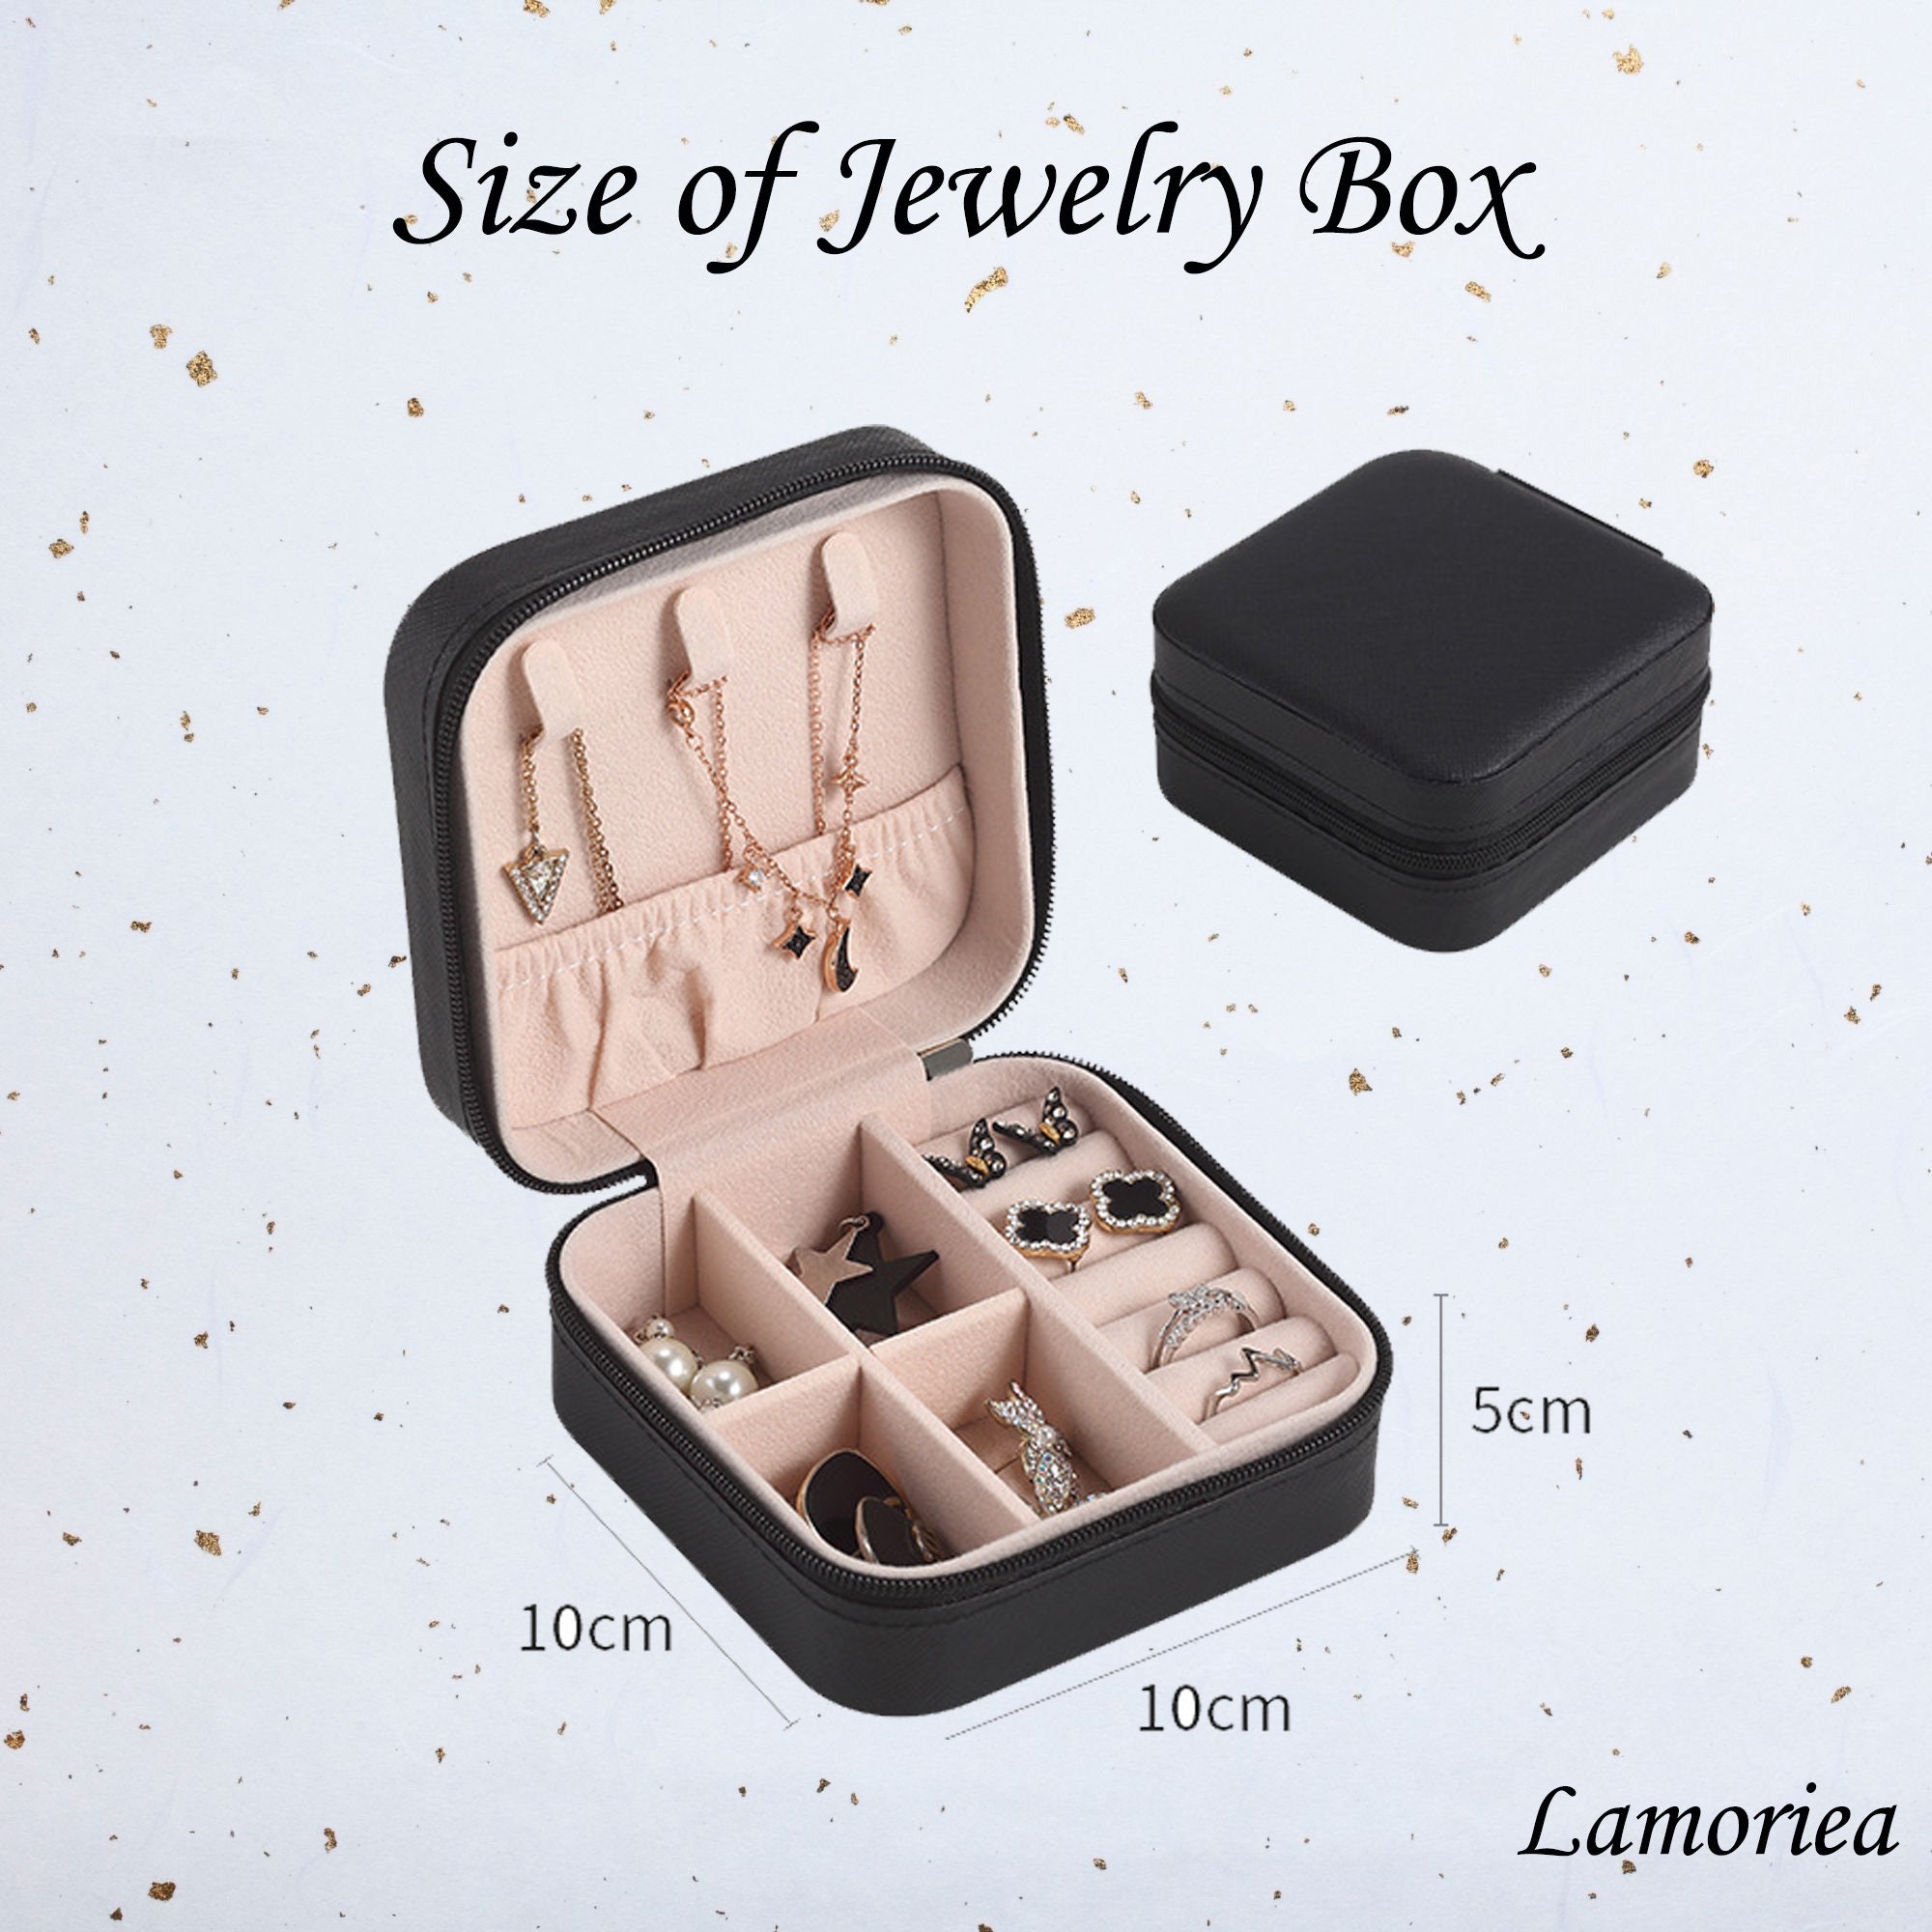 Gift for Woman Who Has Everything, Mini Jewelry Box With Her Name, Portable  Accessories Case, Personalized Travel Case, Jewelry Box for Her 